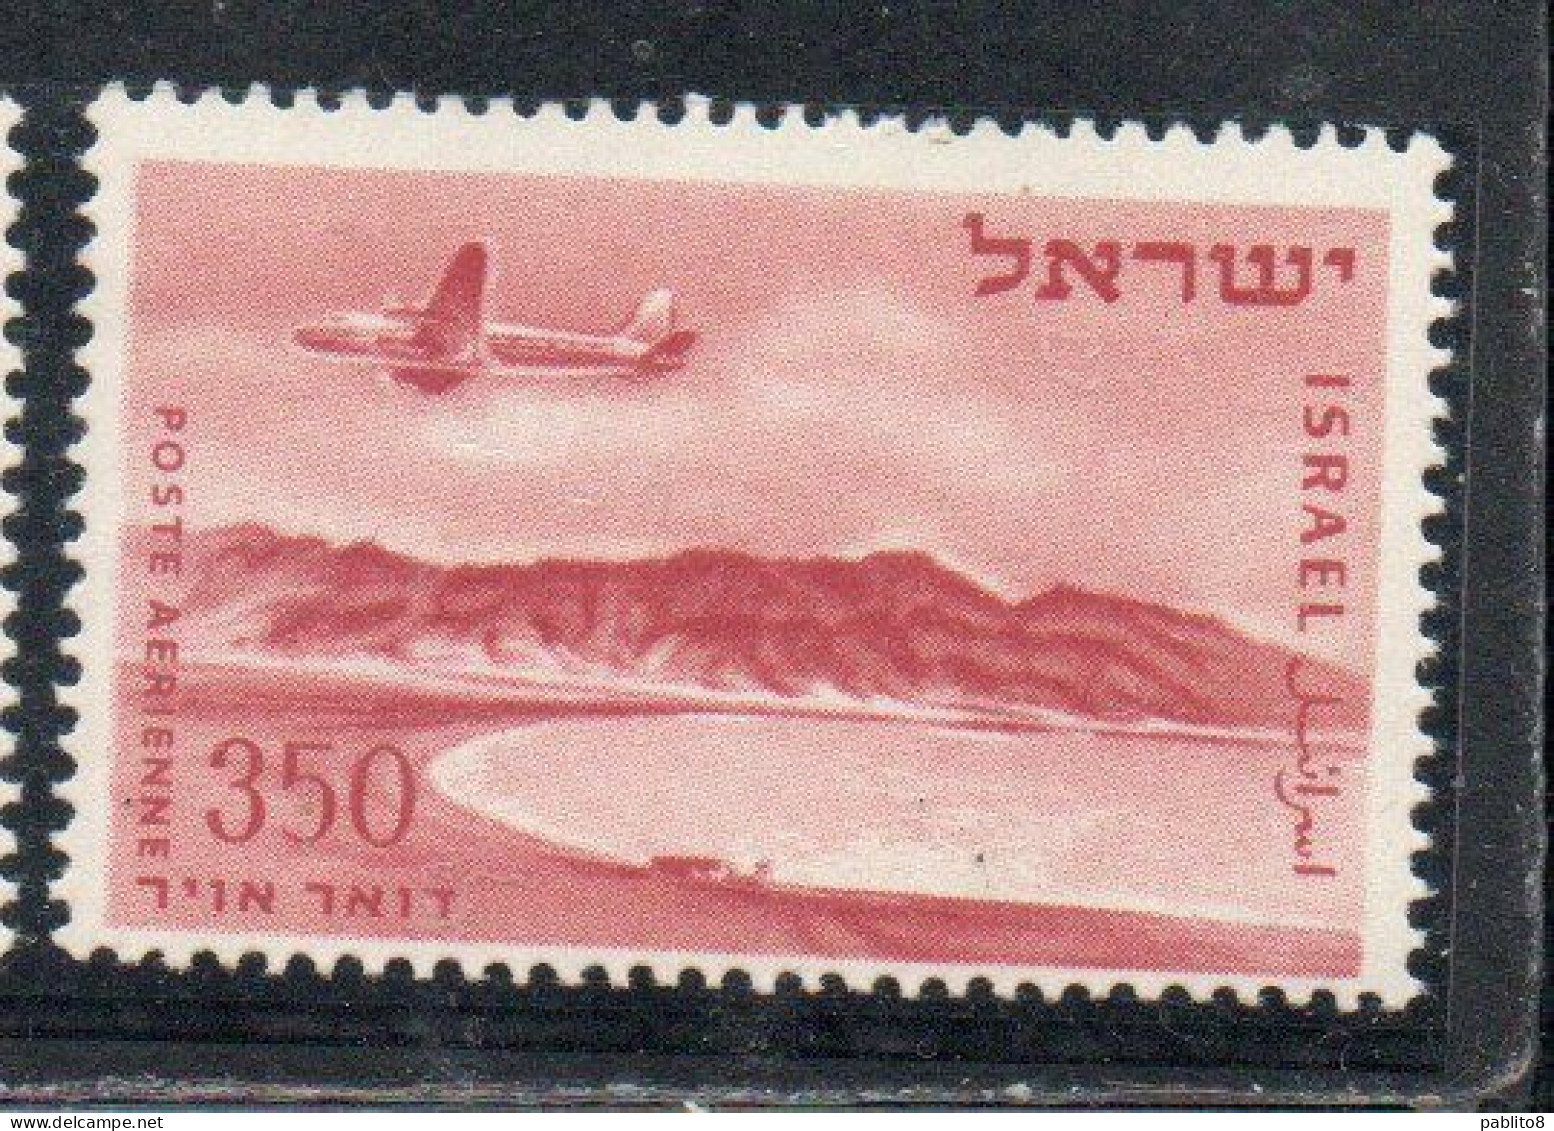 ISRAEL ISRAELE 1953 1956 AIRMAIL AIR POST MAIL BAY OF ELAT RED SEA 350p MNH - Aéreo